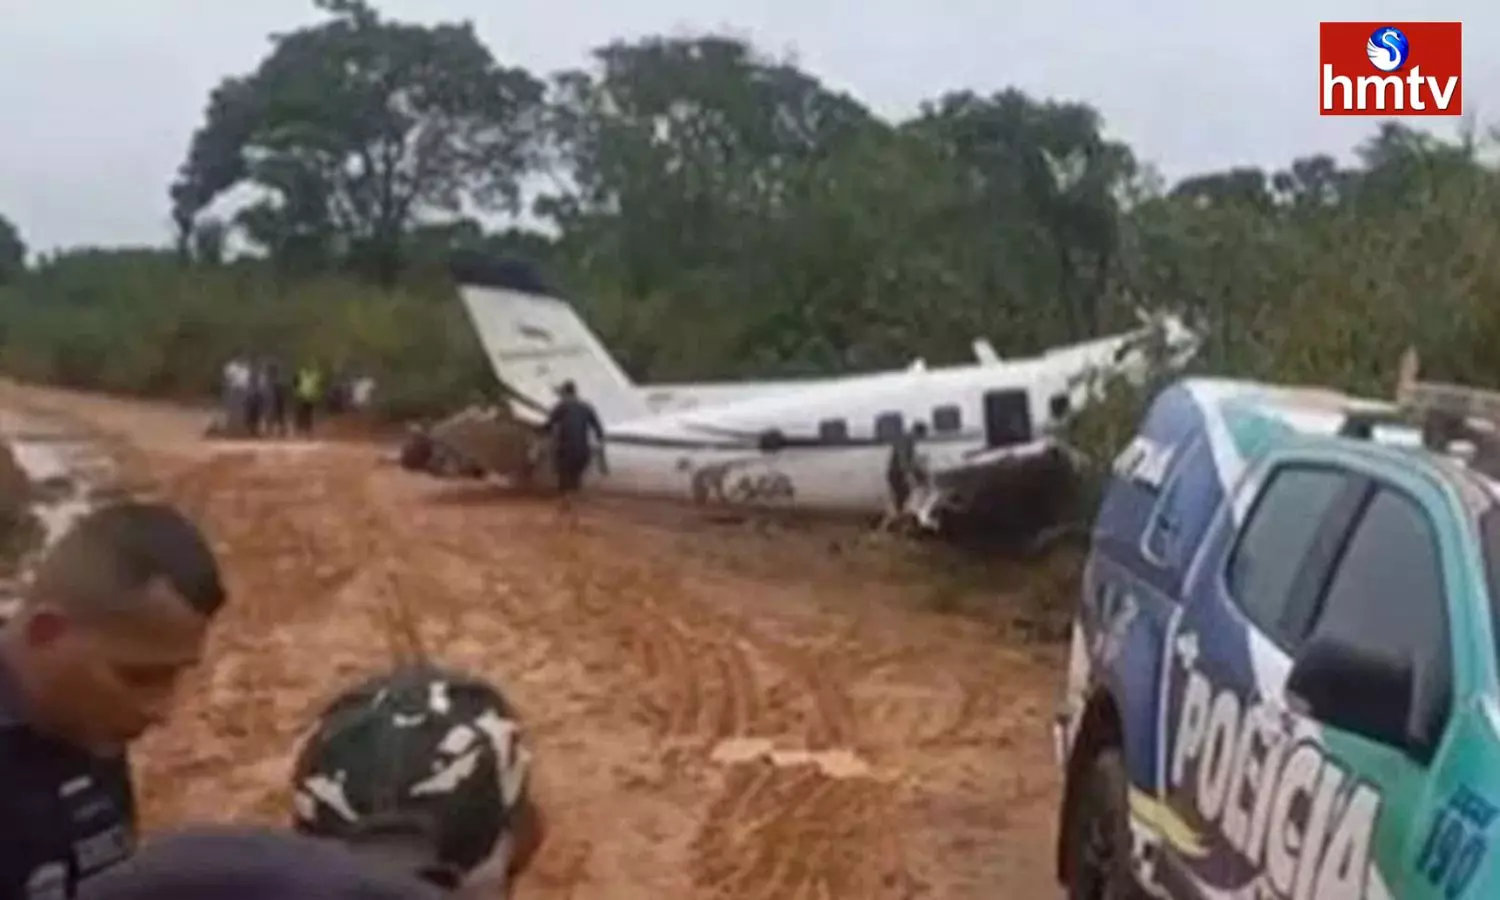 14 Killed After Plane Crashes In Brazil